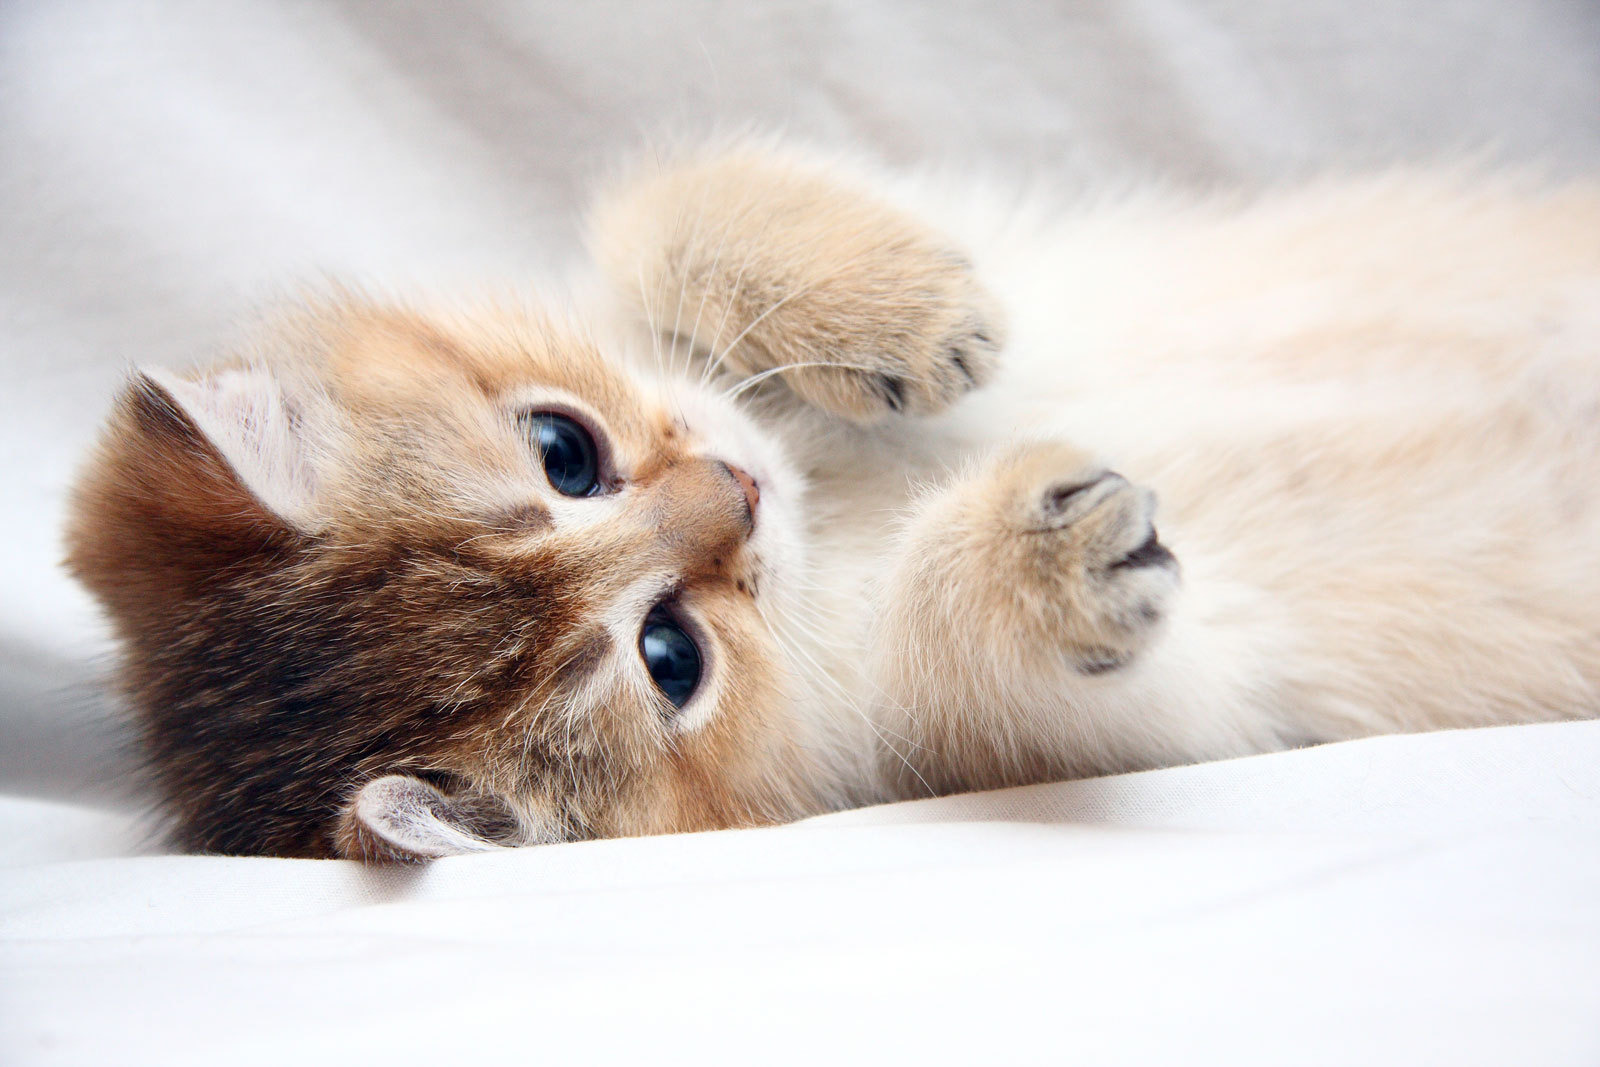 Cats images So cute HD wallpaper and background photos